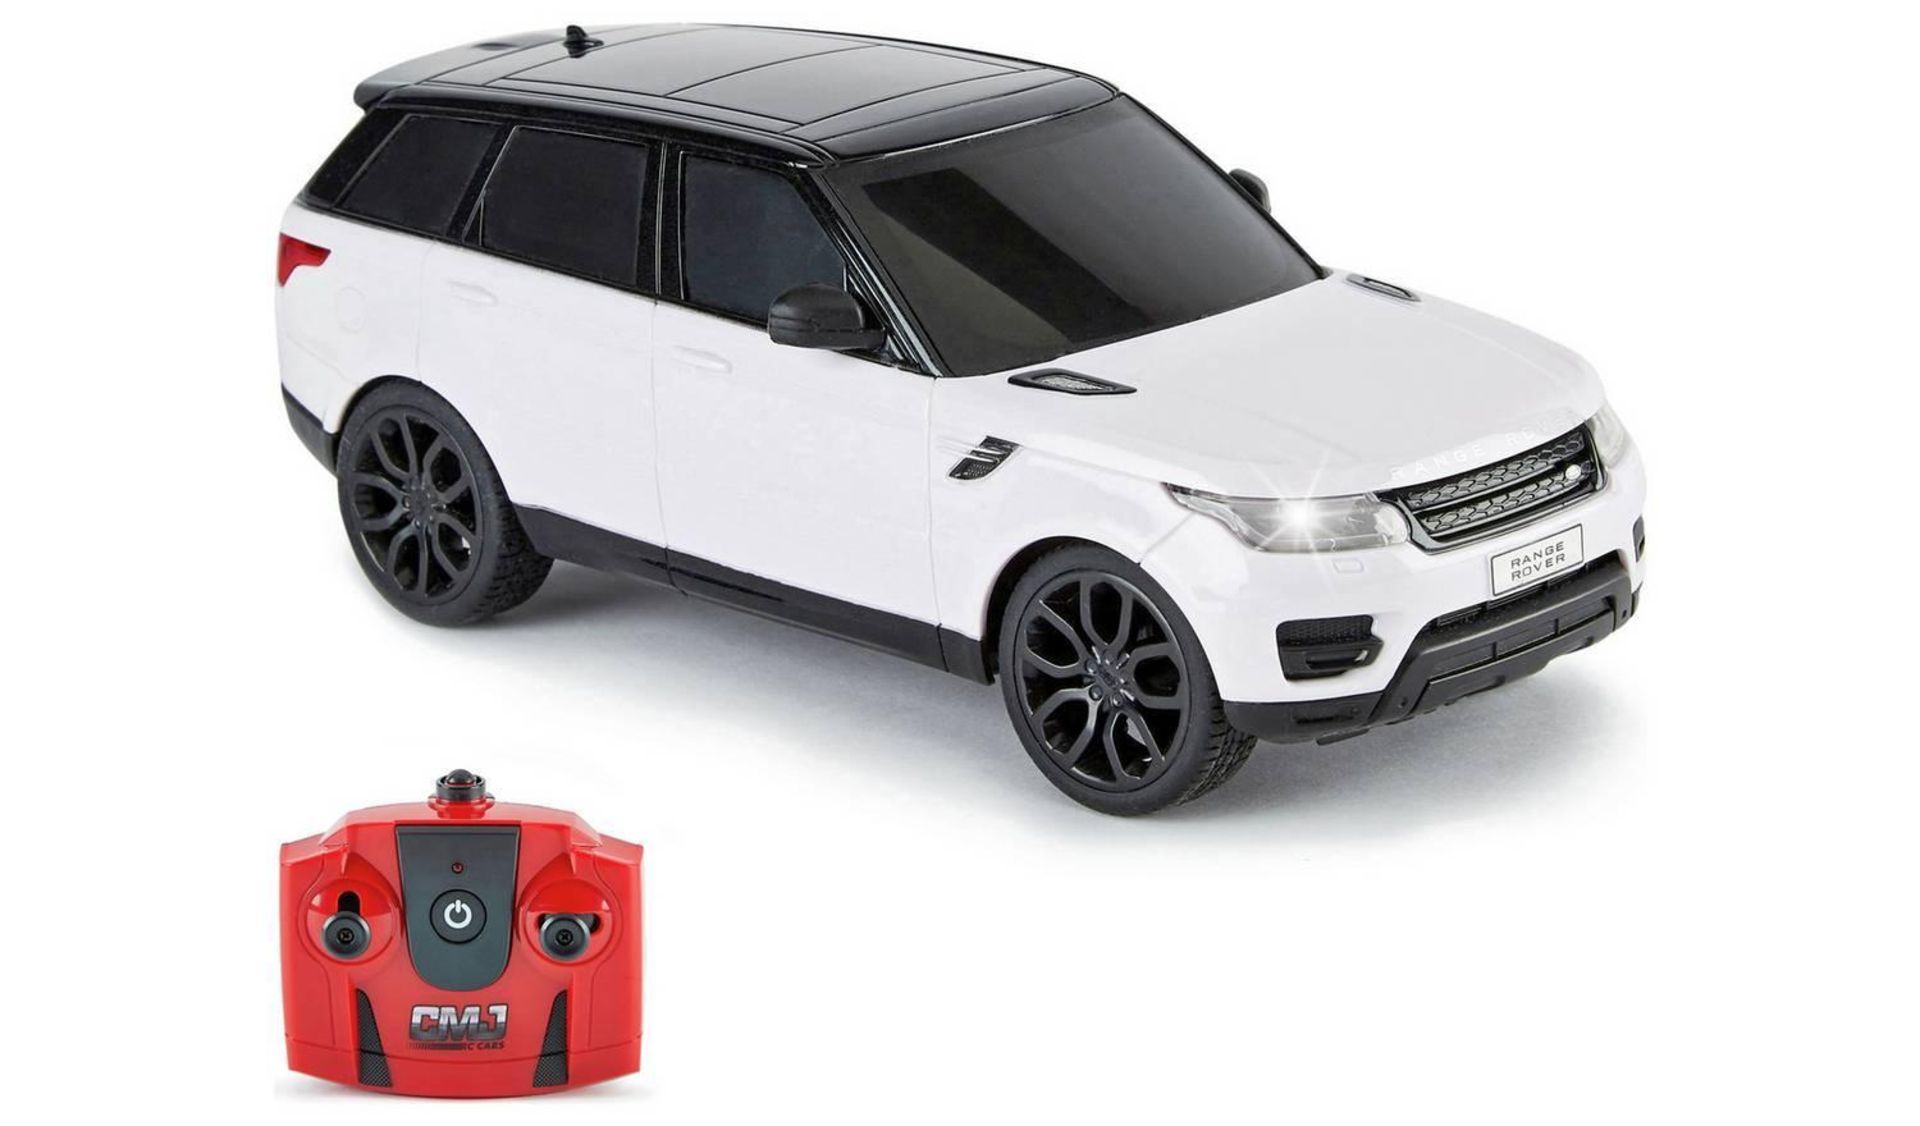 Radio Controlled Range Rover 1:24 Scale - White 2.4GHZ, £11.00 RRP